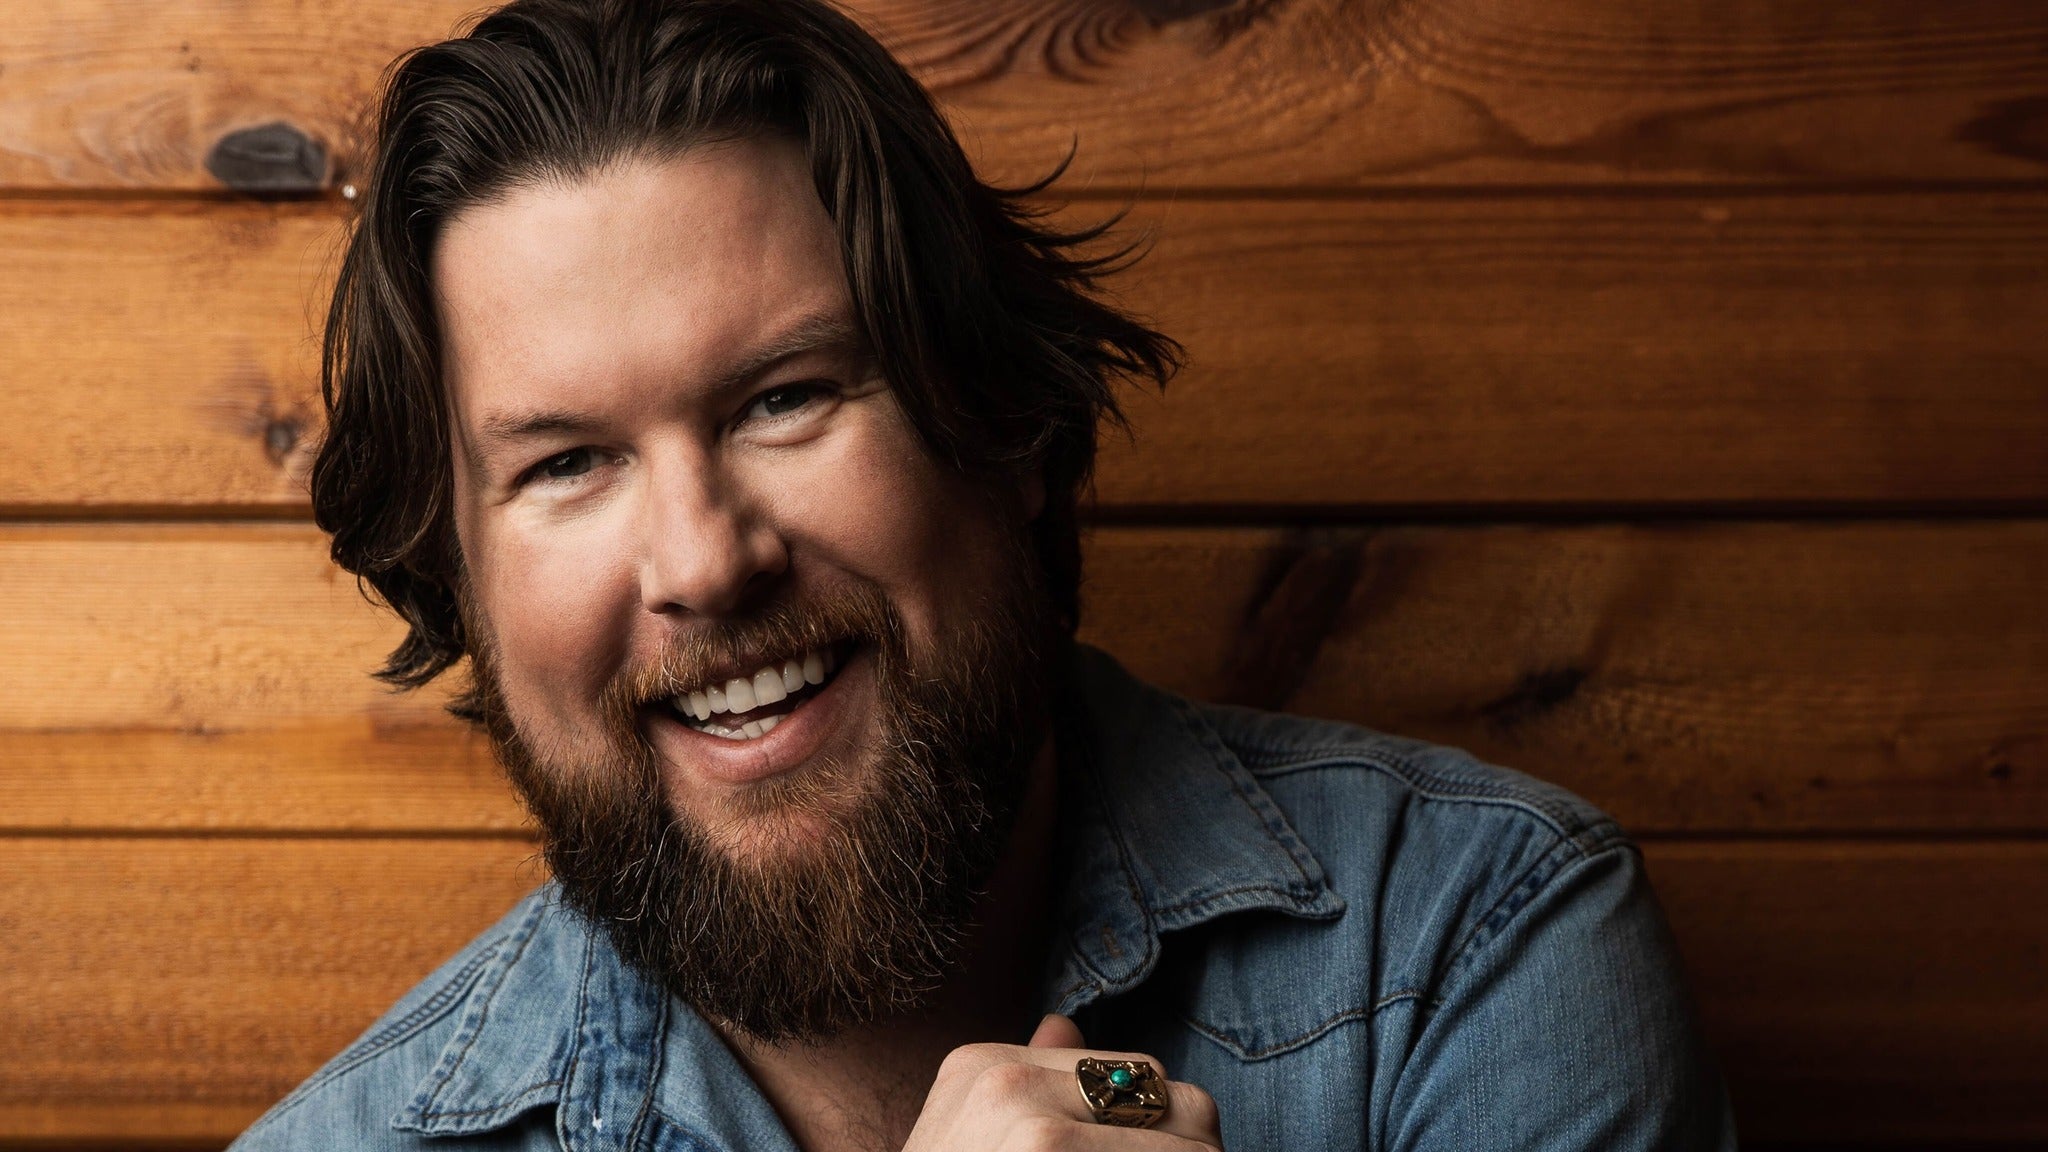 Zach Williams A Hundred Highways Tour at Adler Theatre